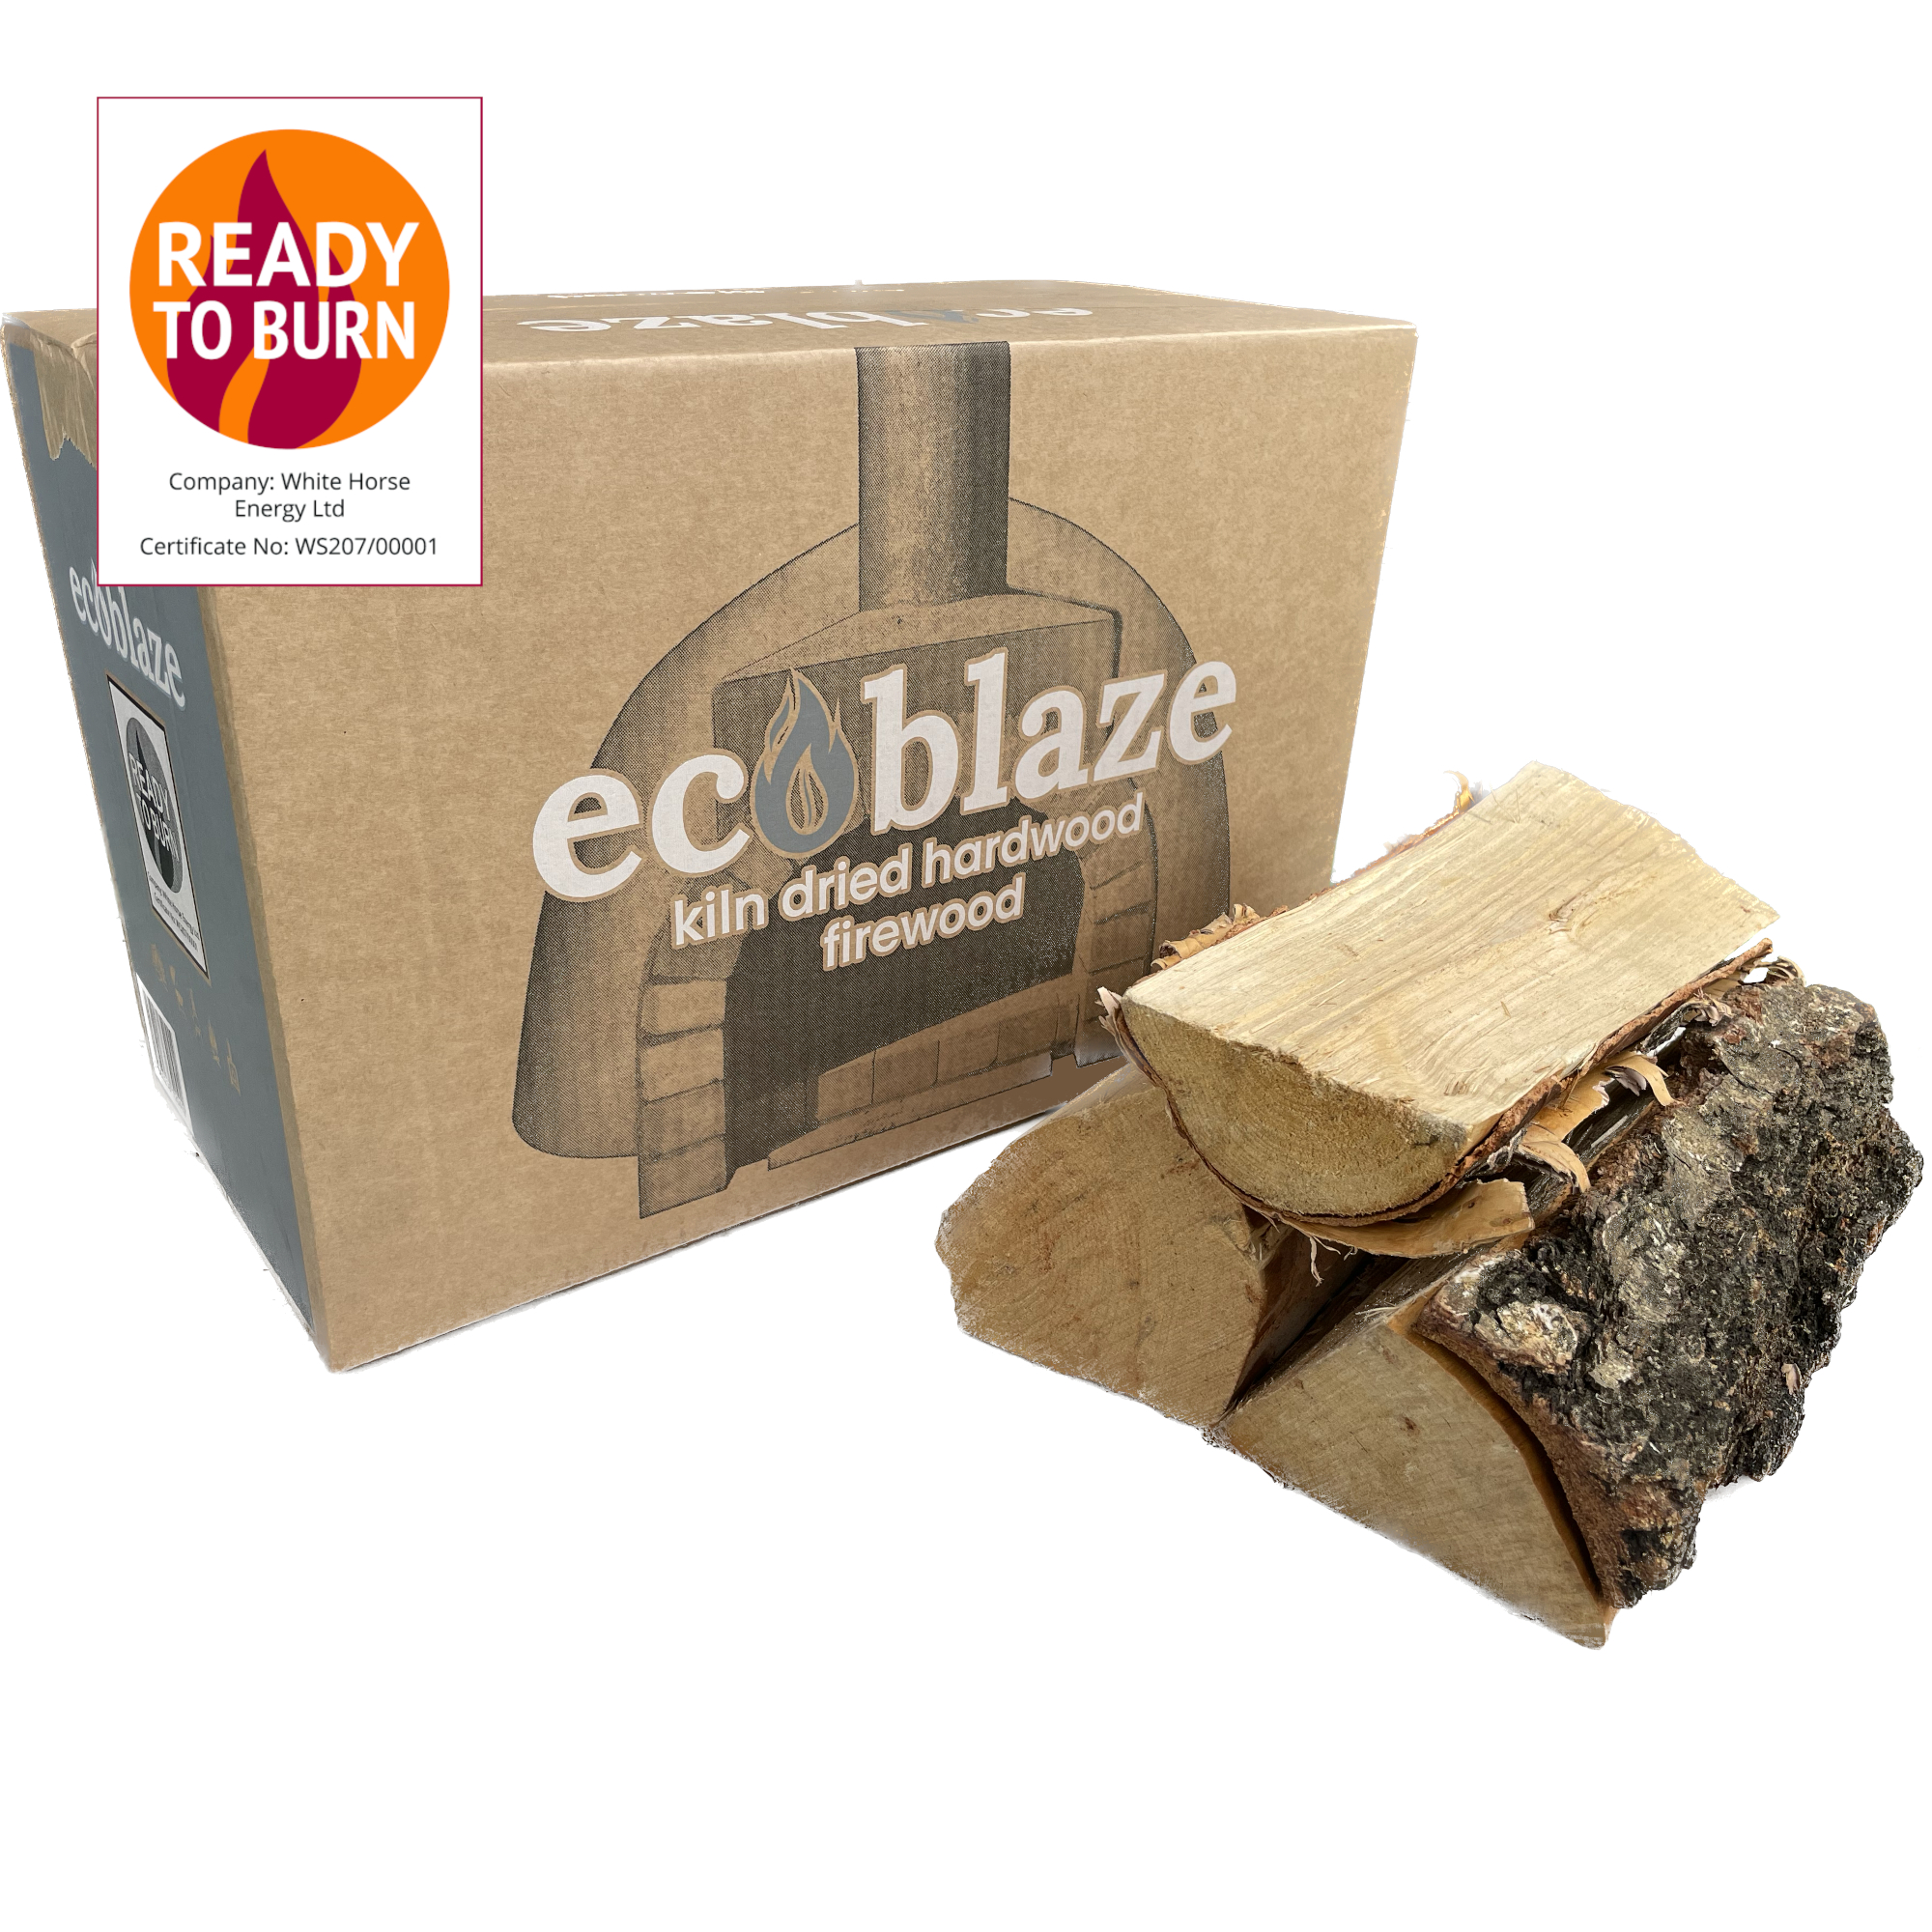 Box of kiln dried birch firewood logs with ready to burn logo - Wood Fuel Coop